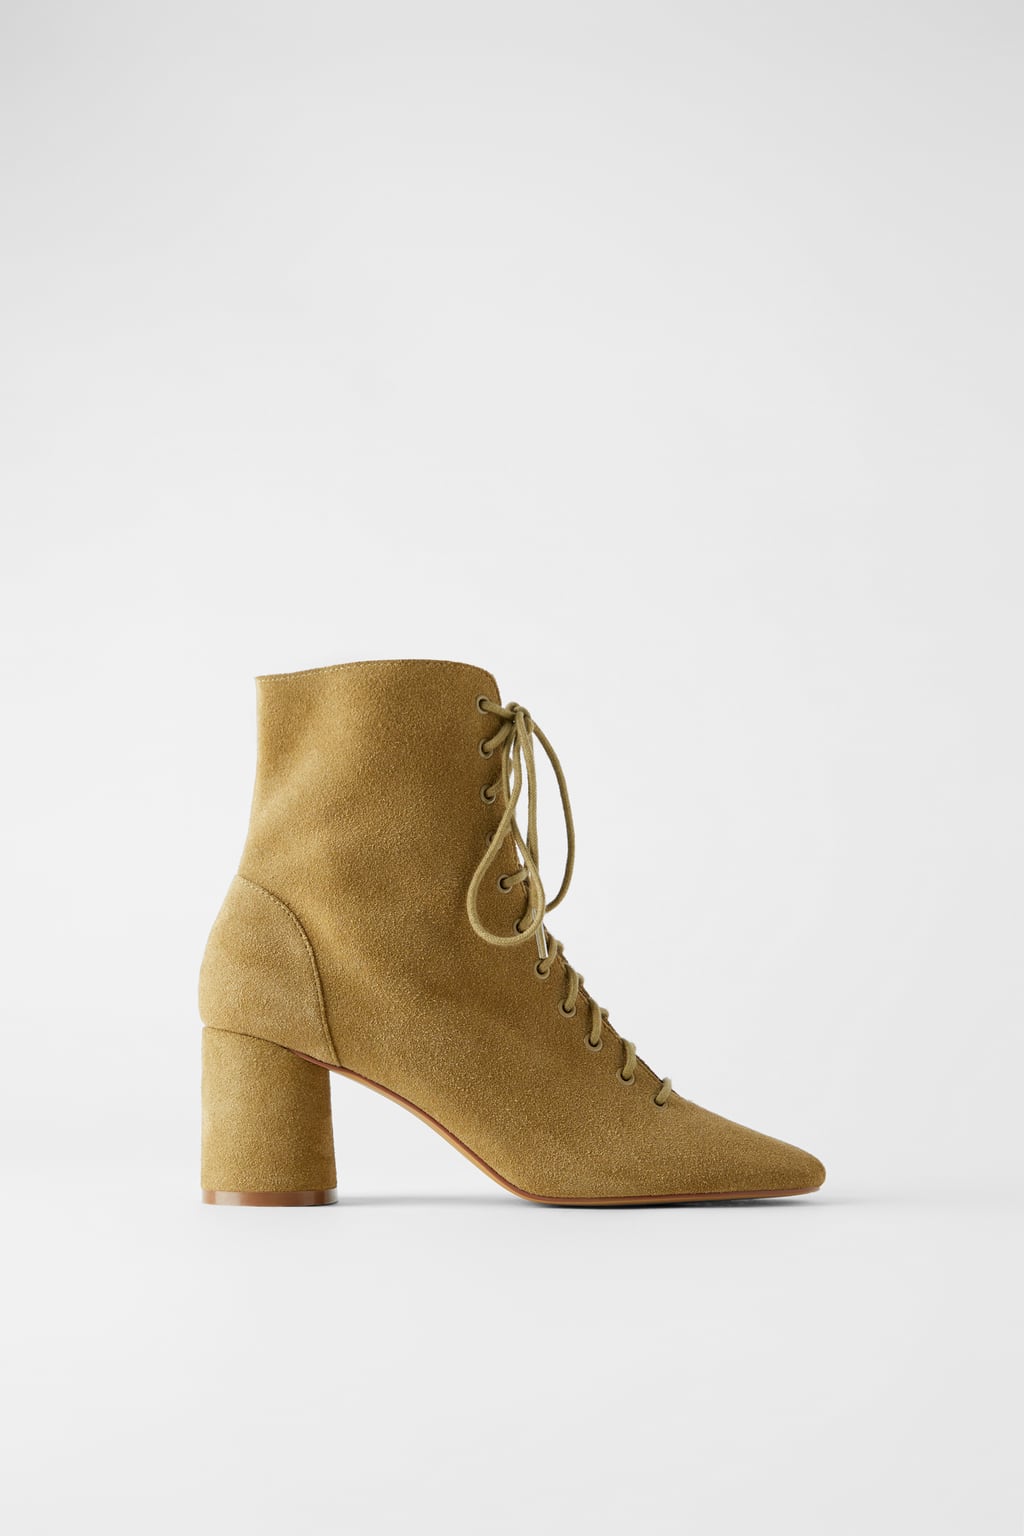 zara leather lace up boots